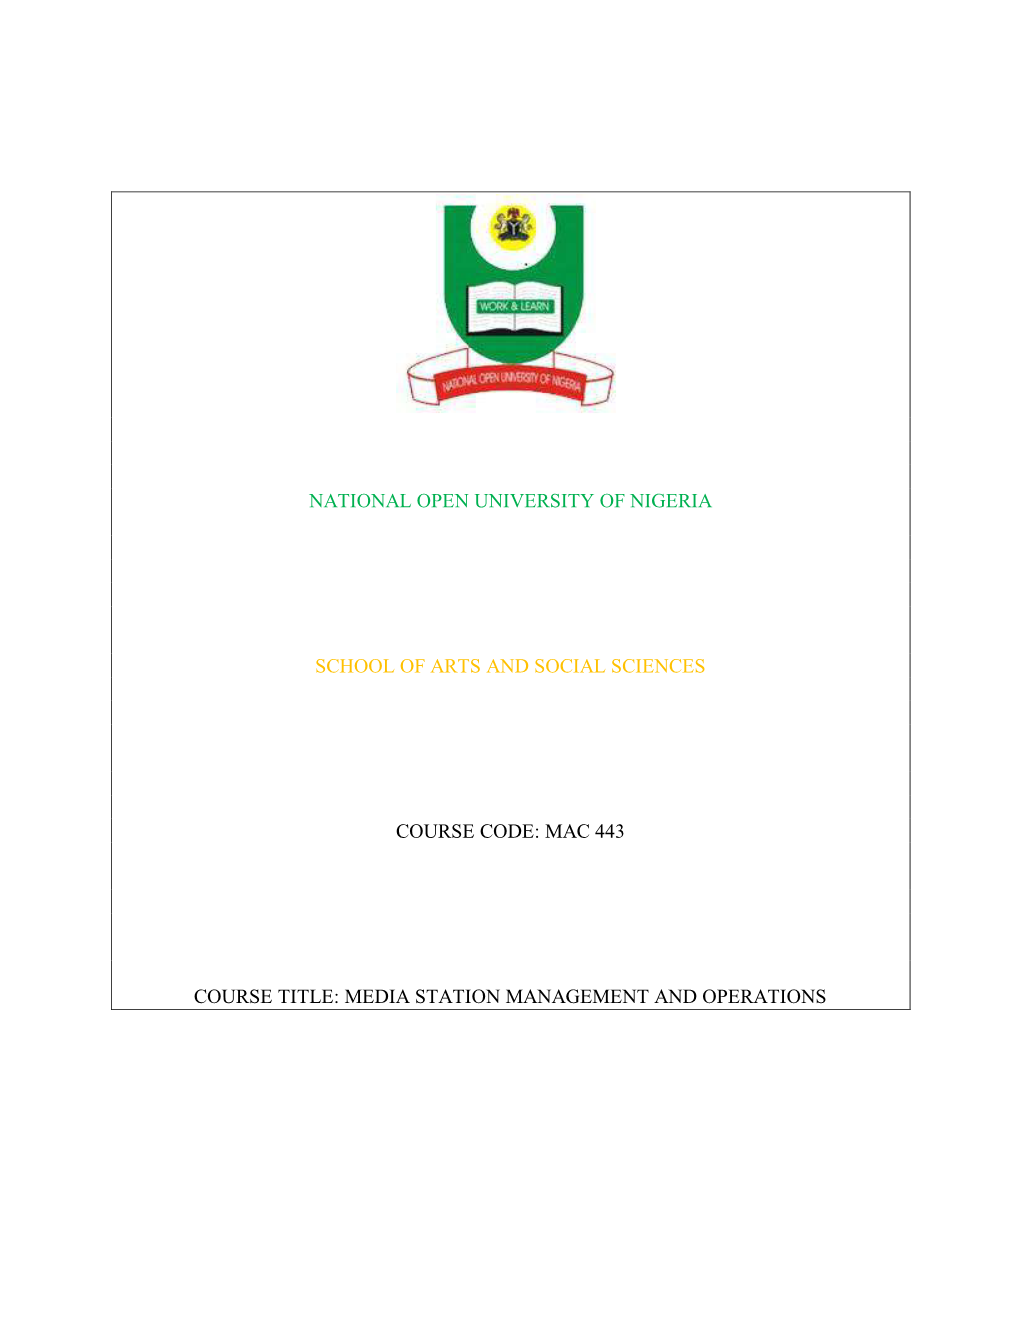 National Open University of Nigeria School of Arts and Social Sciences Course Code: Mac 443 Course Title: Media Station Manageme